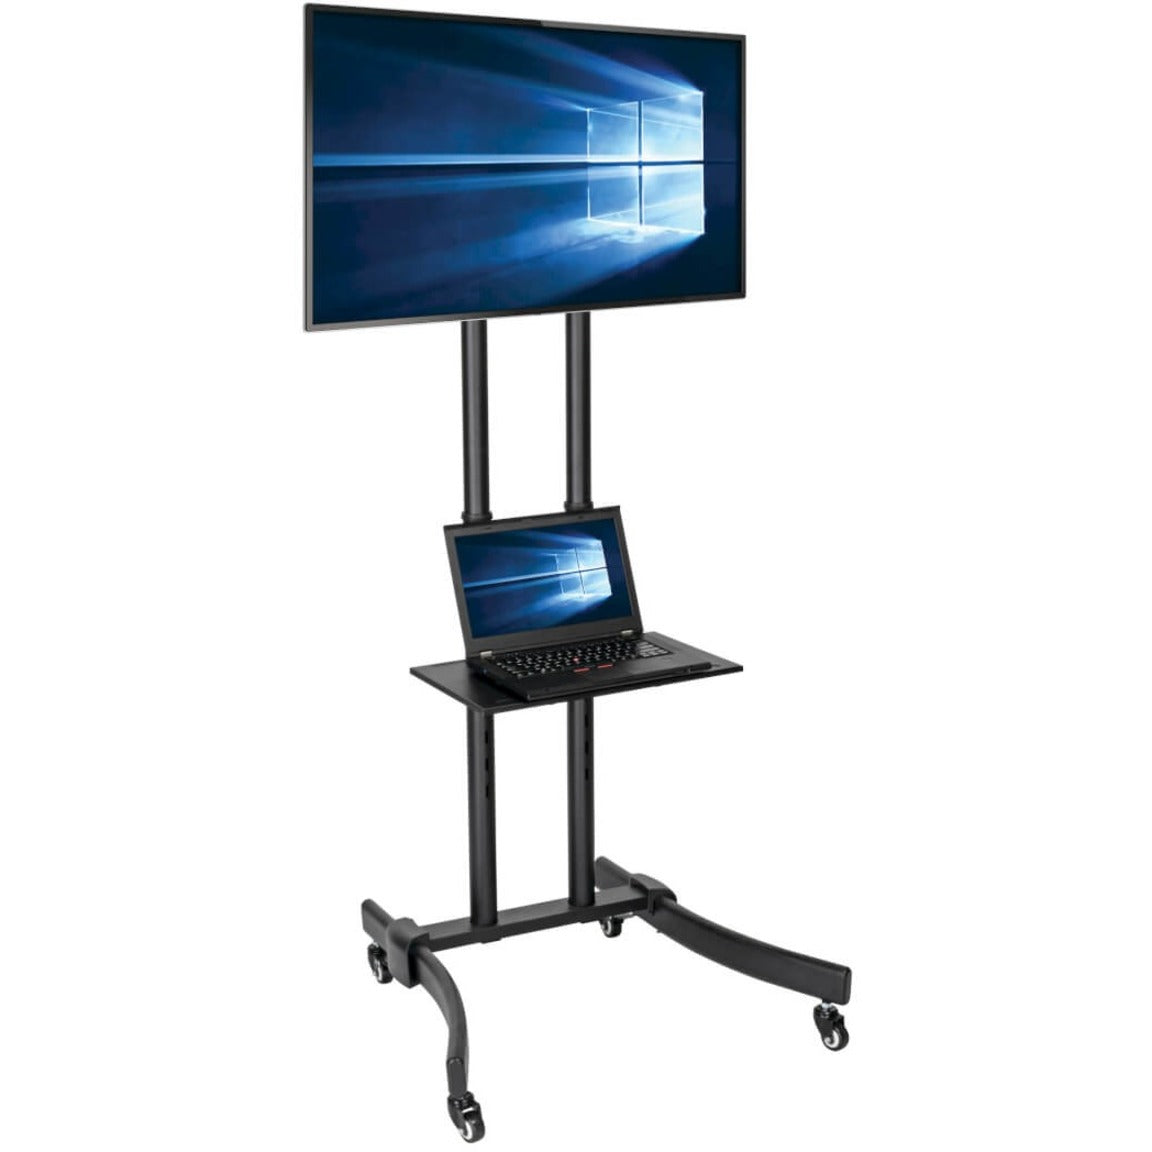 Tripp Lite DMCS3770L Mobile Flat-Panel Floor Stand - Classic Edition, 37" to 70" TVs and Monitors, Height Adjustable